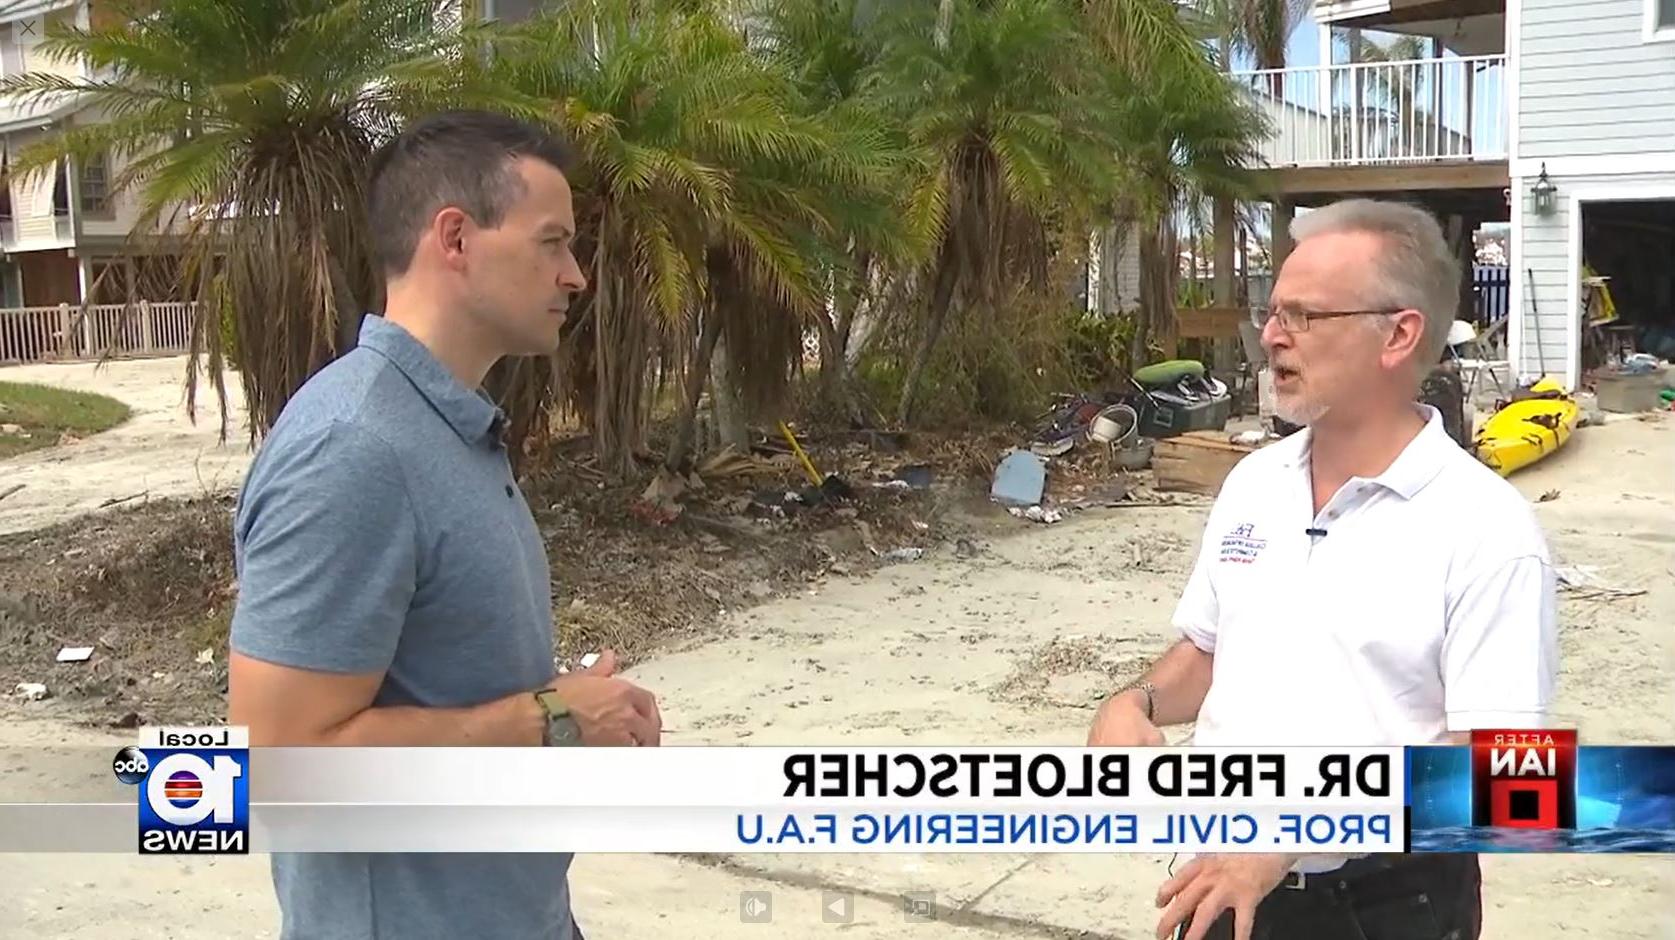 Dr. Bloetscher was interviewed to talk about How did various roof types hold up to Hurricane Ian